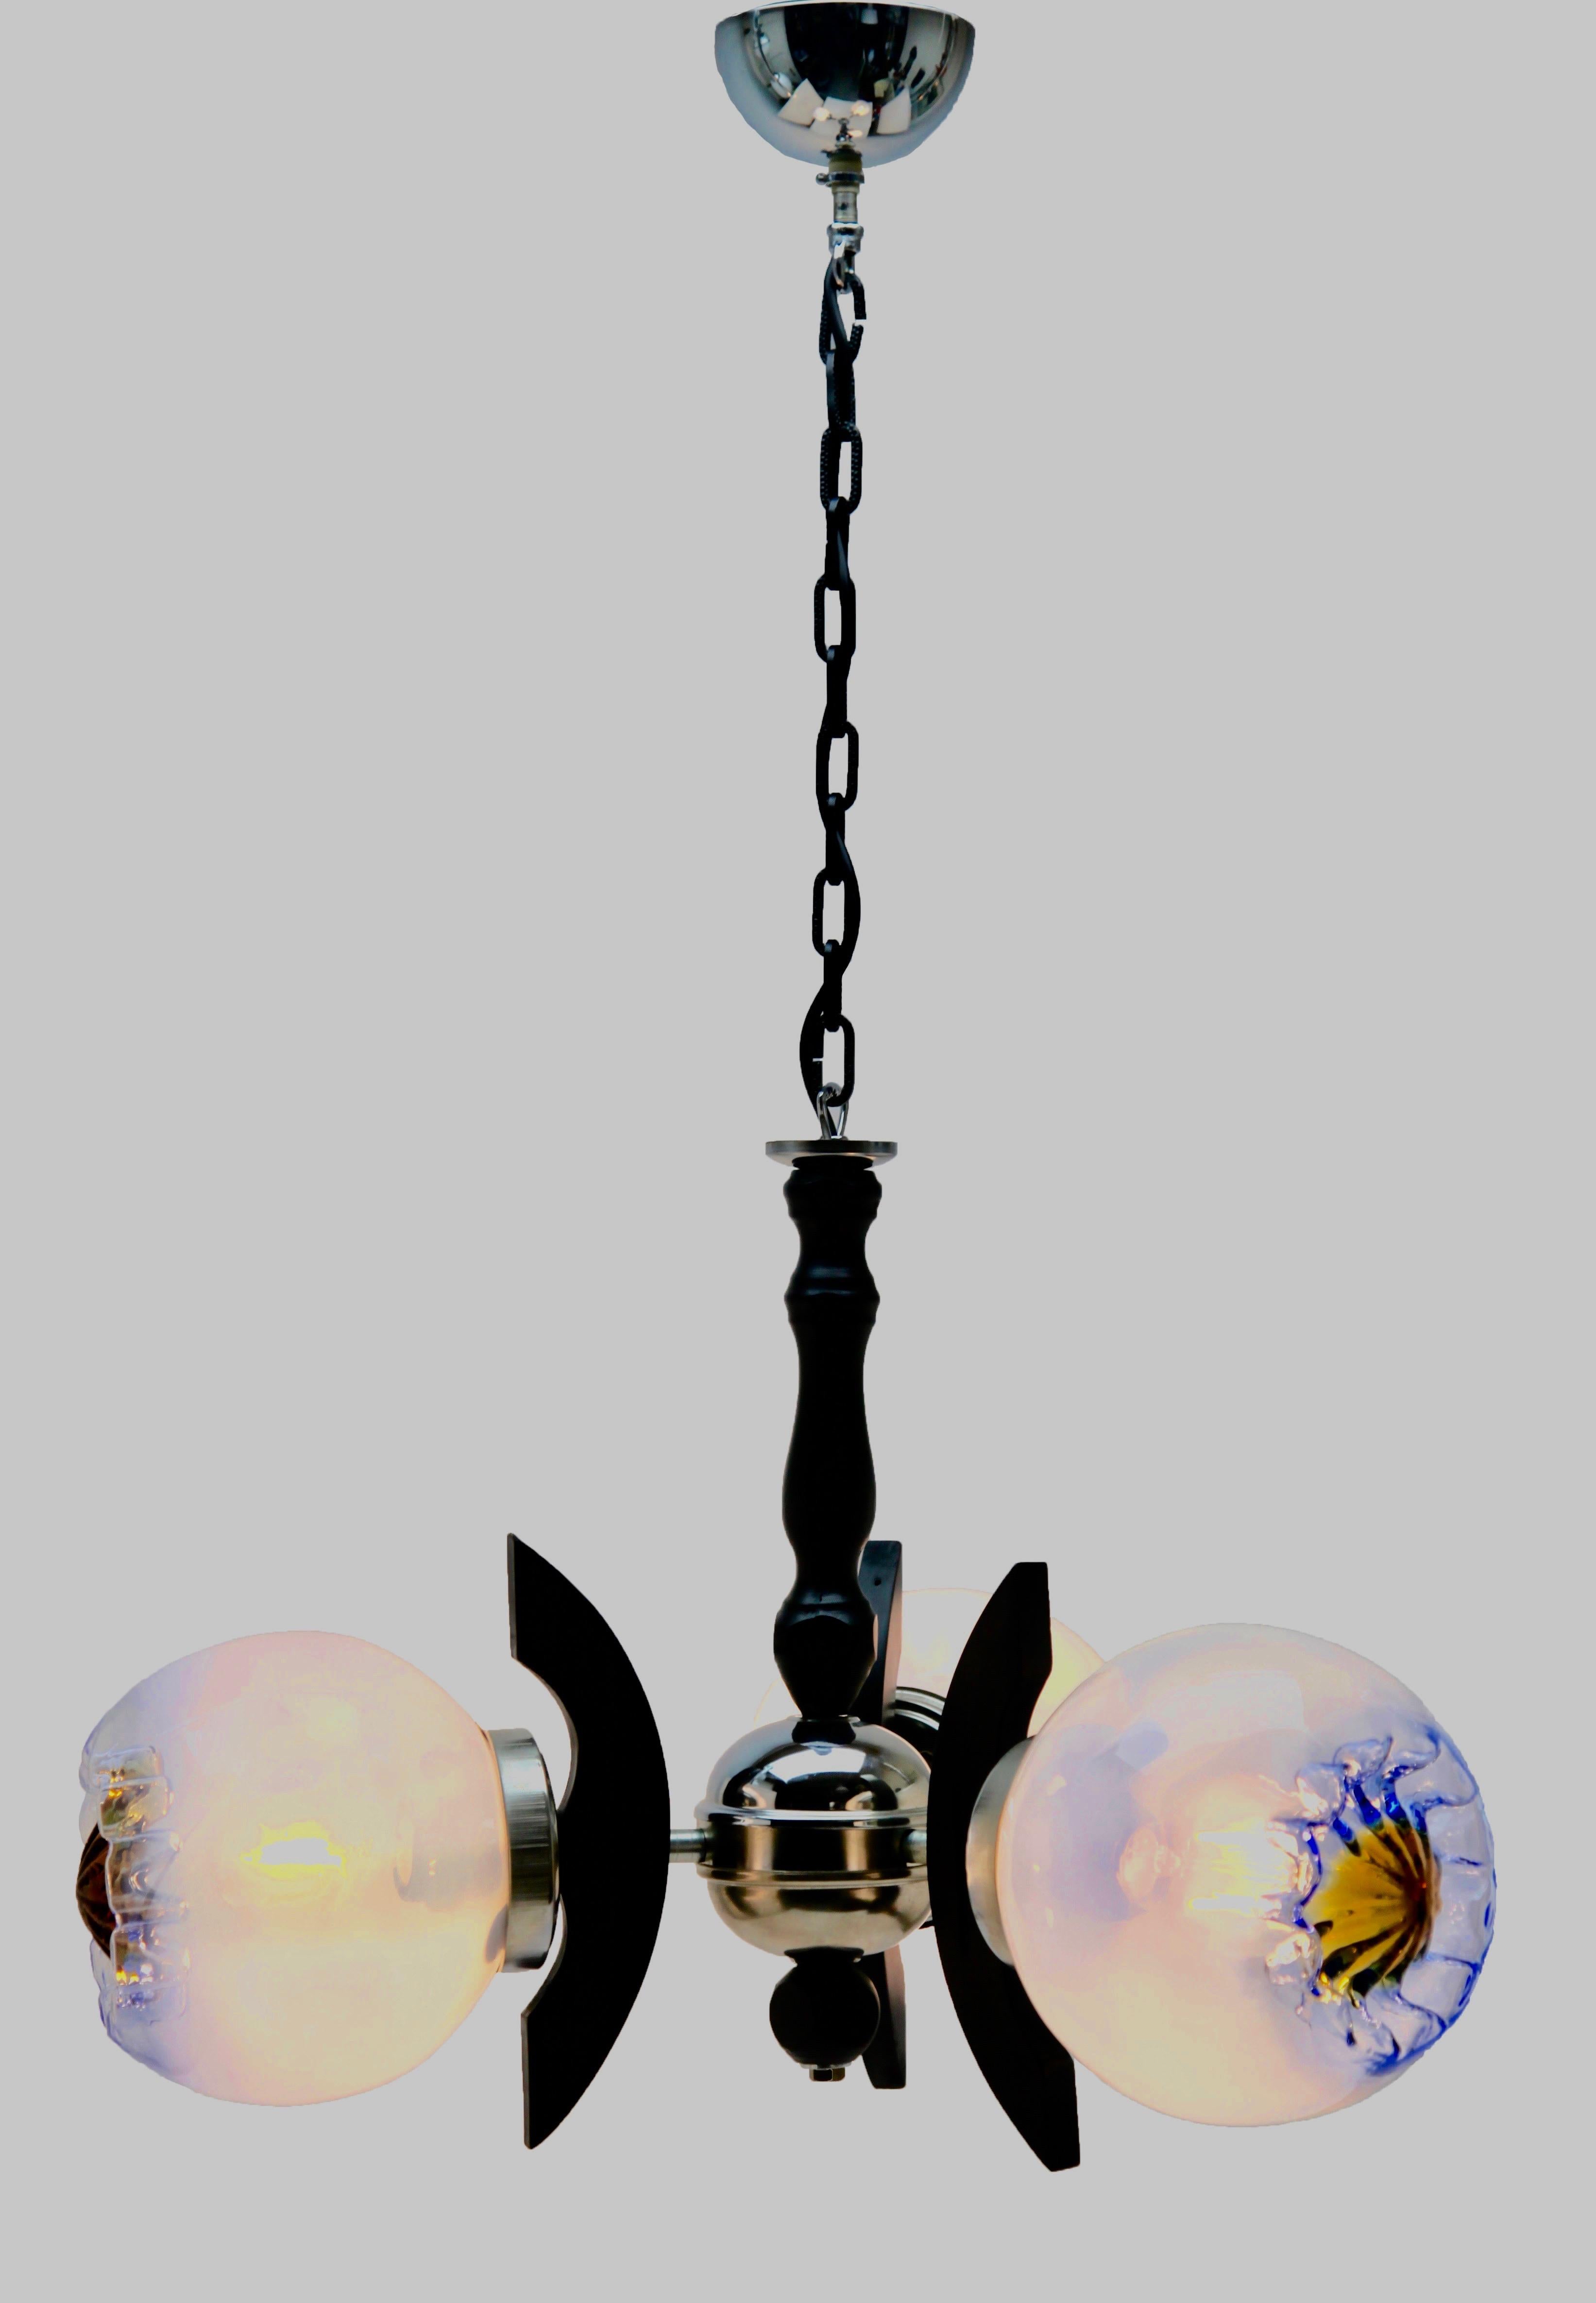 Pendant by Mazzega with 3 Globes of Clear Glass with Orange and Bleu Inclusions For Sale 1